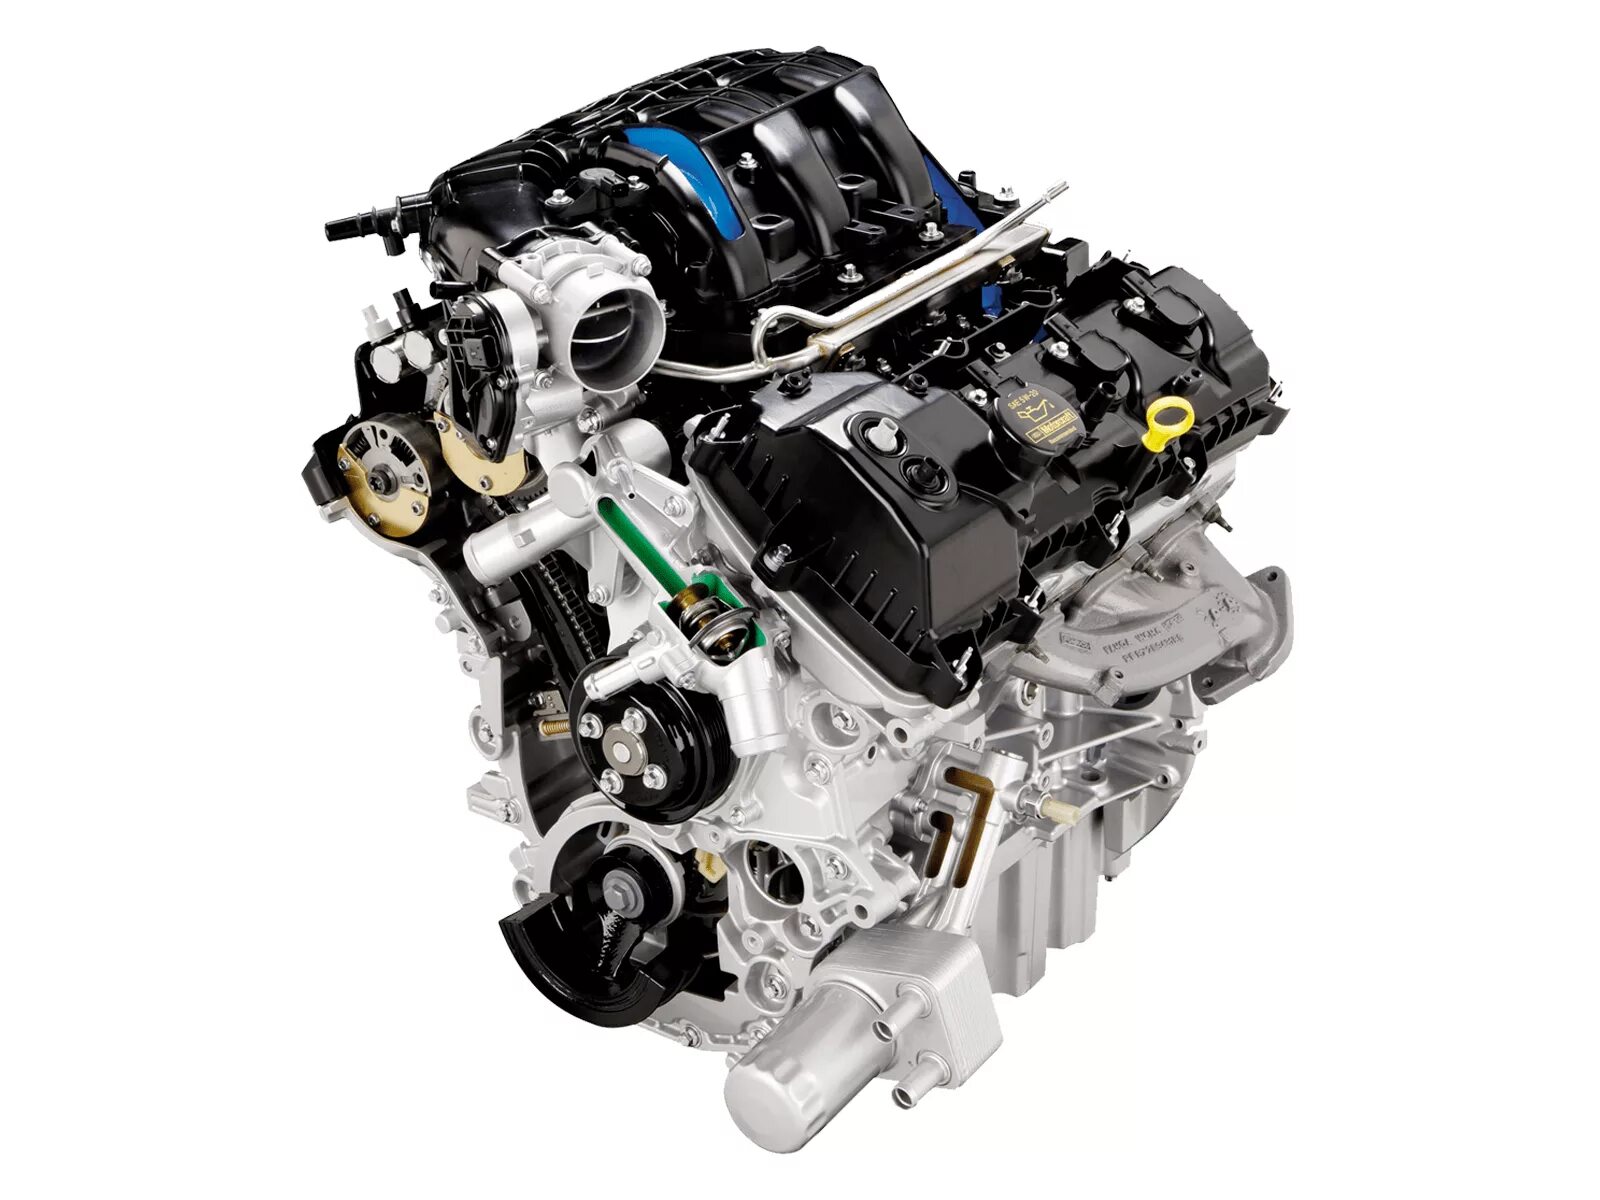 1.6 l sigma ti vct. 3.5 V6 Ford Duratec. Duratec v6 181. Ford 3.5 ECOBOOST двигатель. Ford 2.7 ECOBOOST.